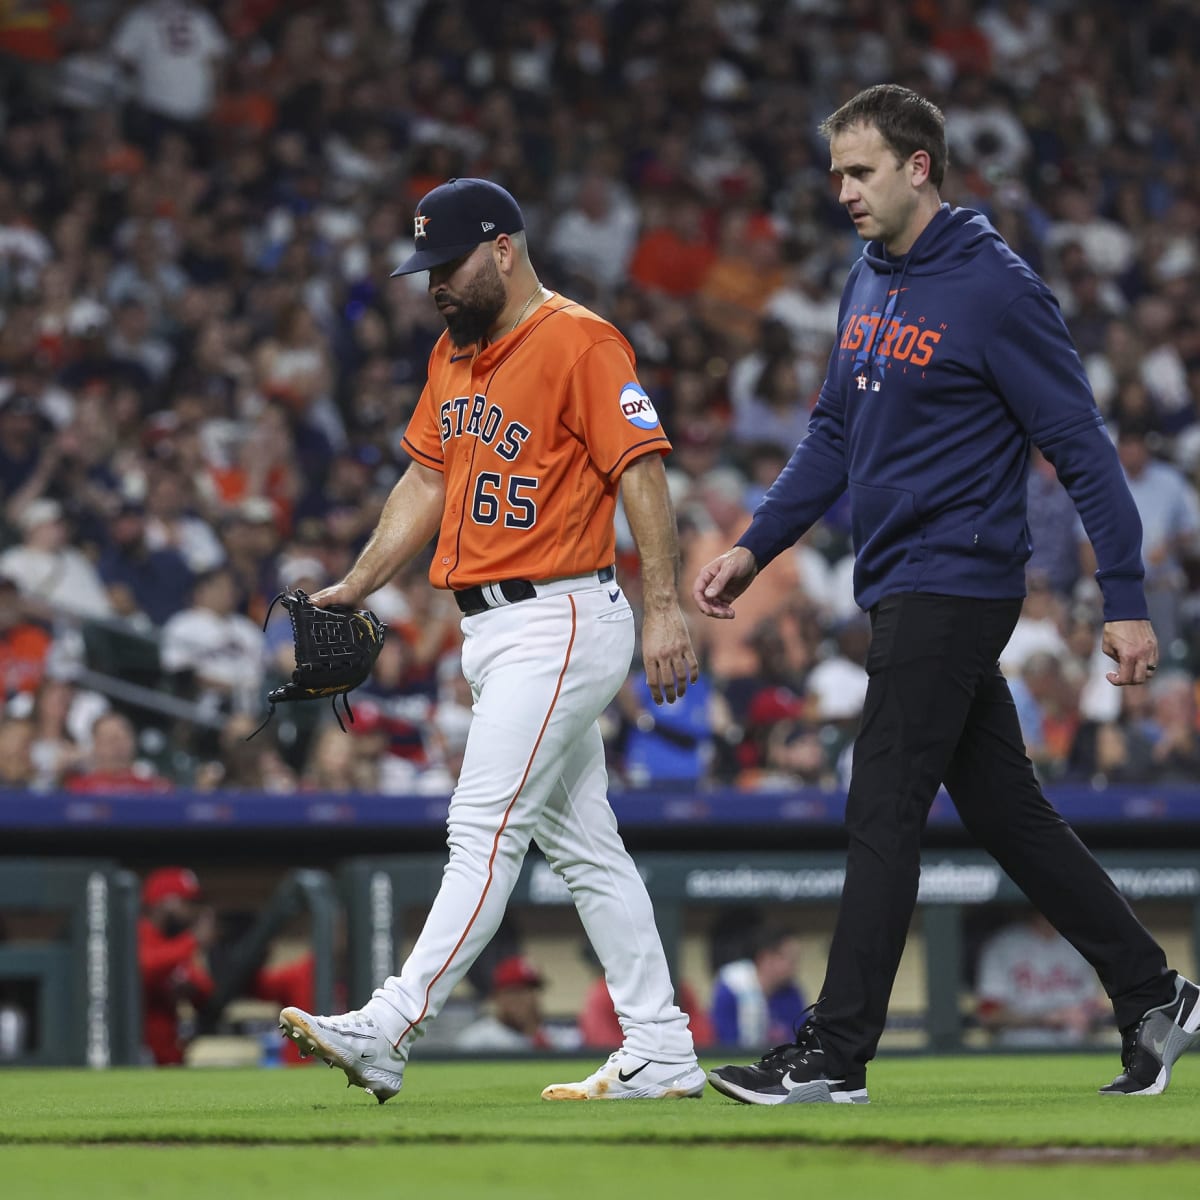 BREAKING: Jose Urquidy of Houston Astros Leaves Game with Apparent Injury -  Fastball